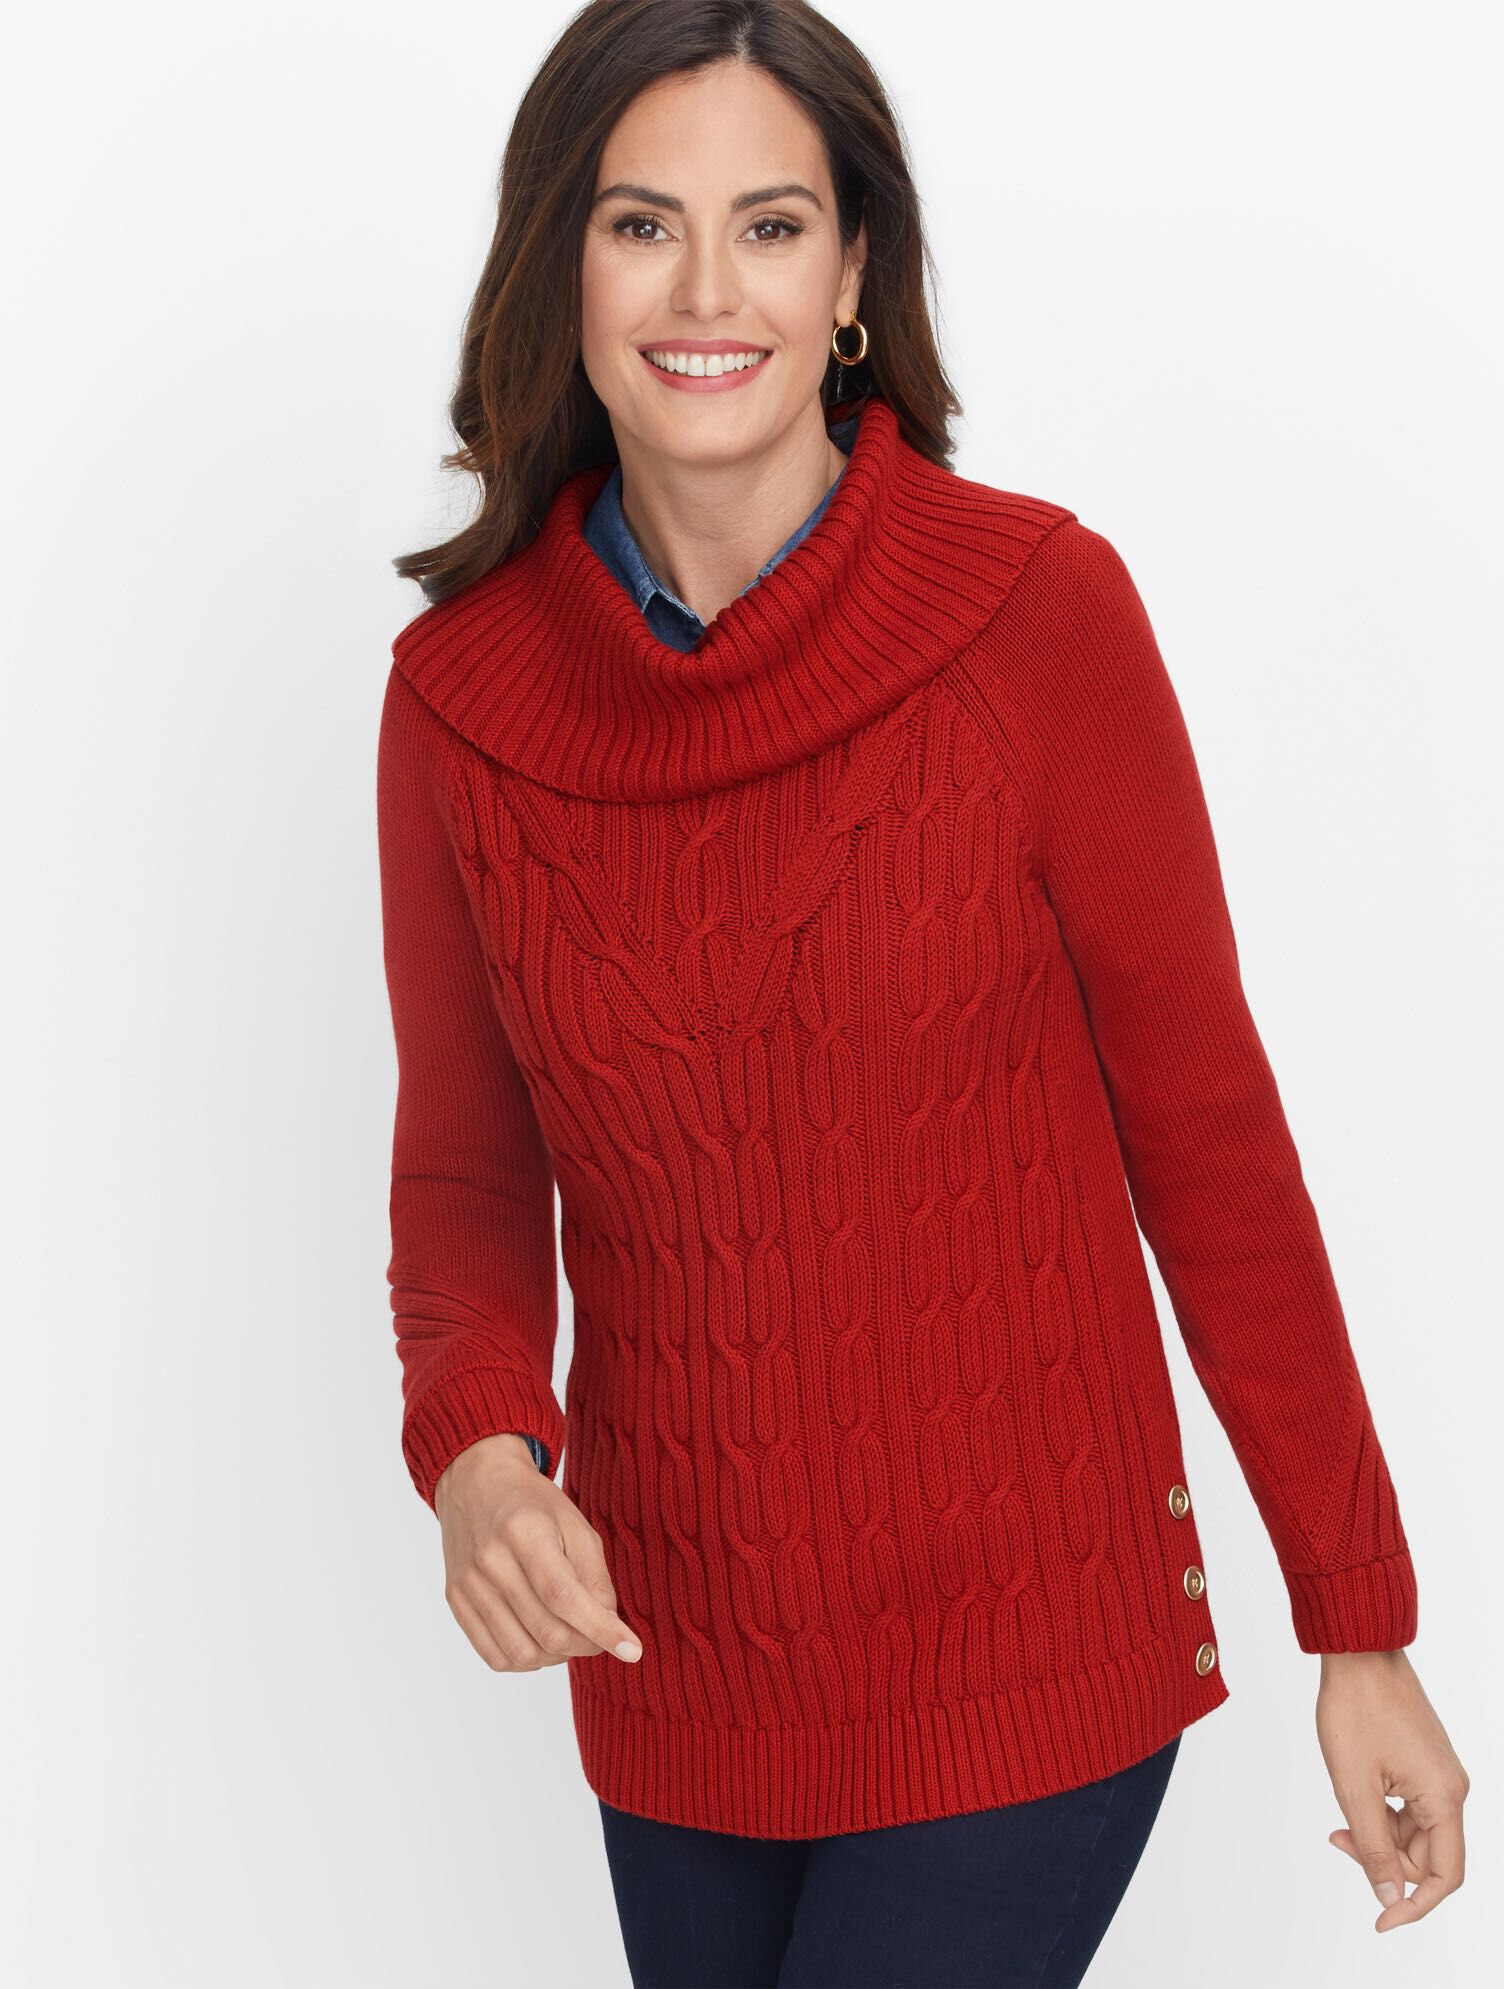 Cotton Cowlneck Sweater - Solid